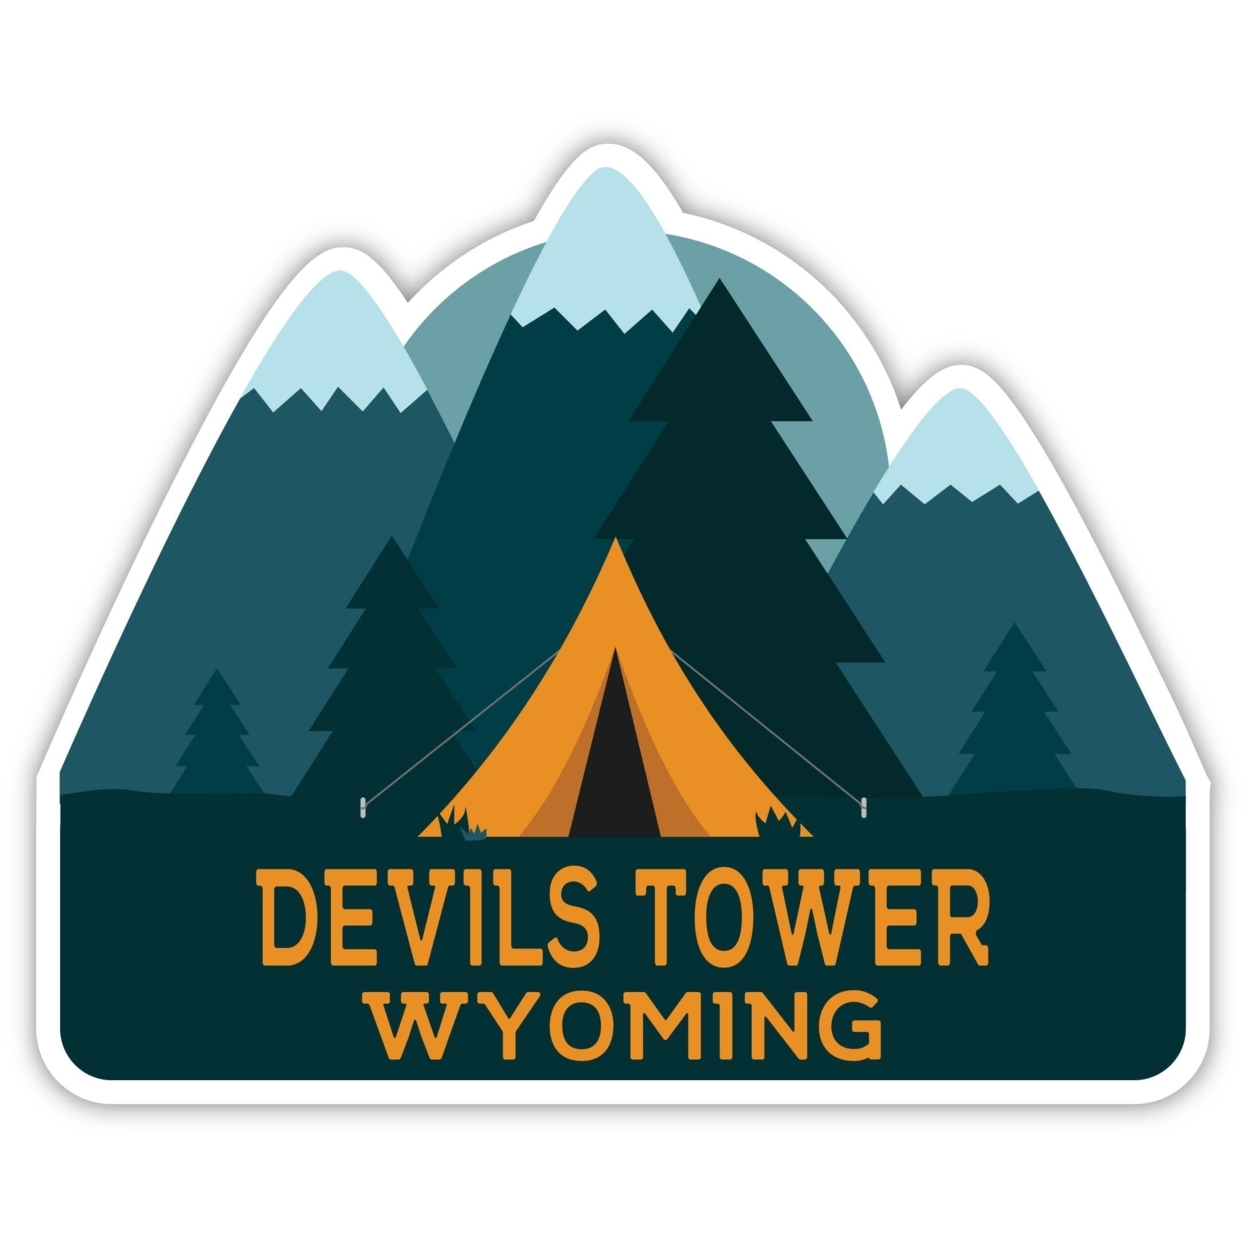 Devils Tower Wyoming Souvenir Decorative Stickers (Choose Theme And Size) - 4-Pack, 10-Inch, Great Outdoors